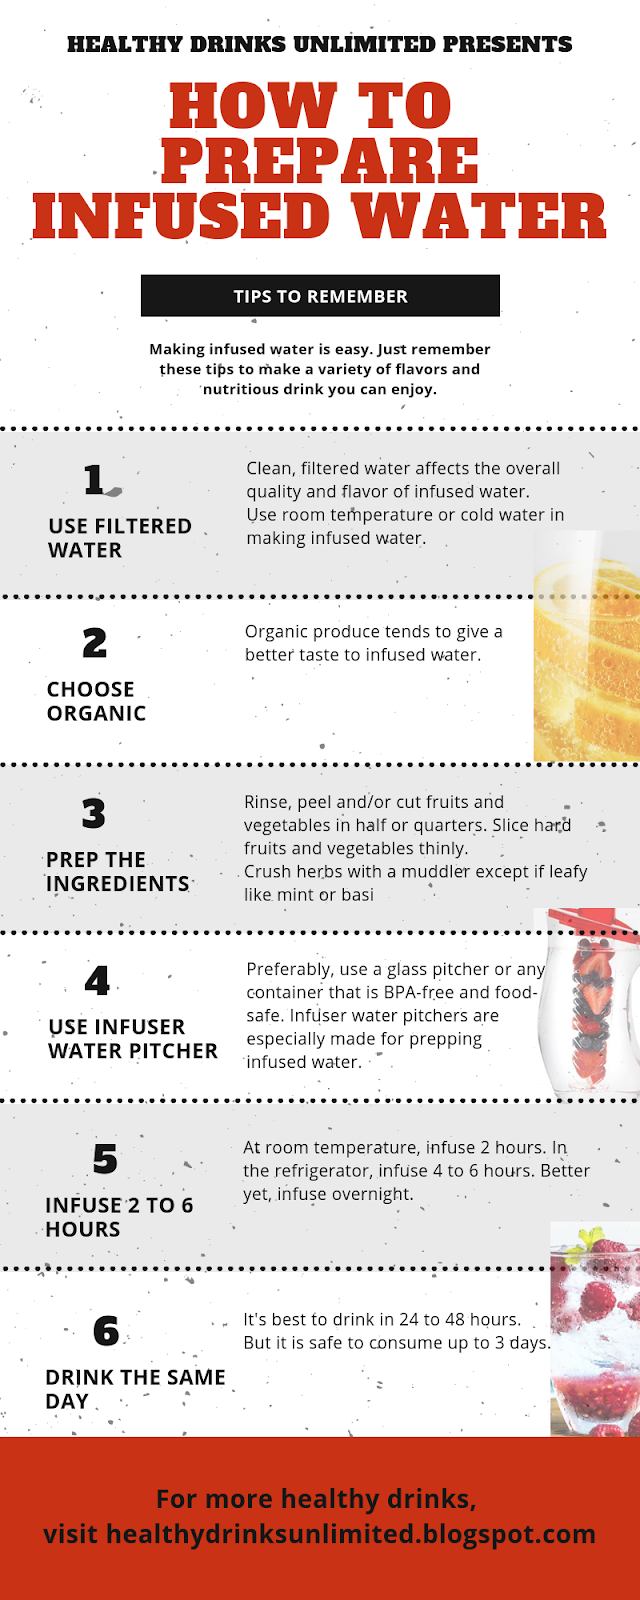 Healthy Drinks Unlimited How To Prepare Infused Water